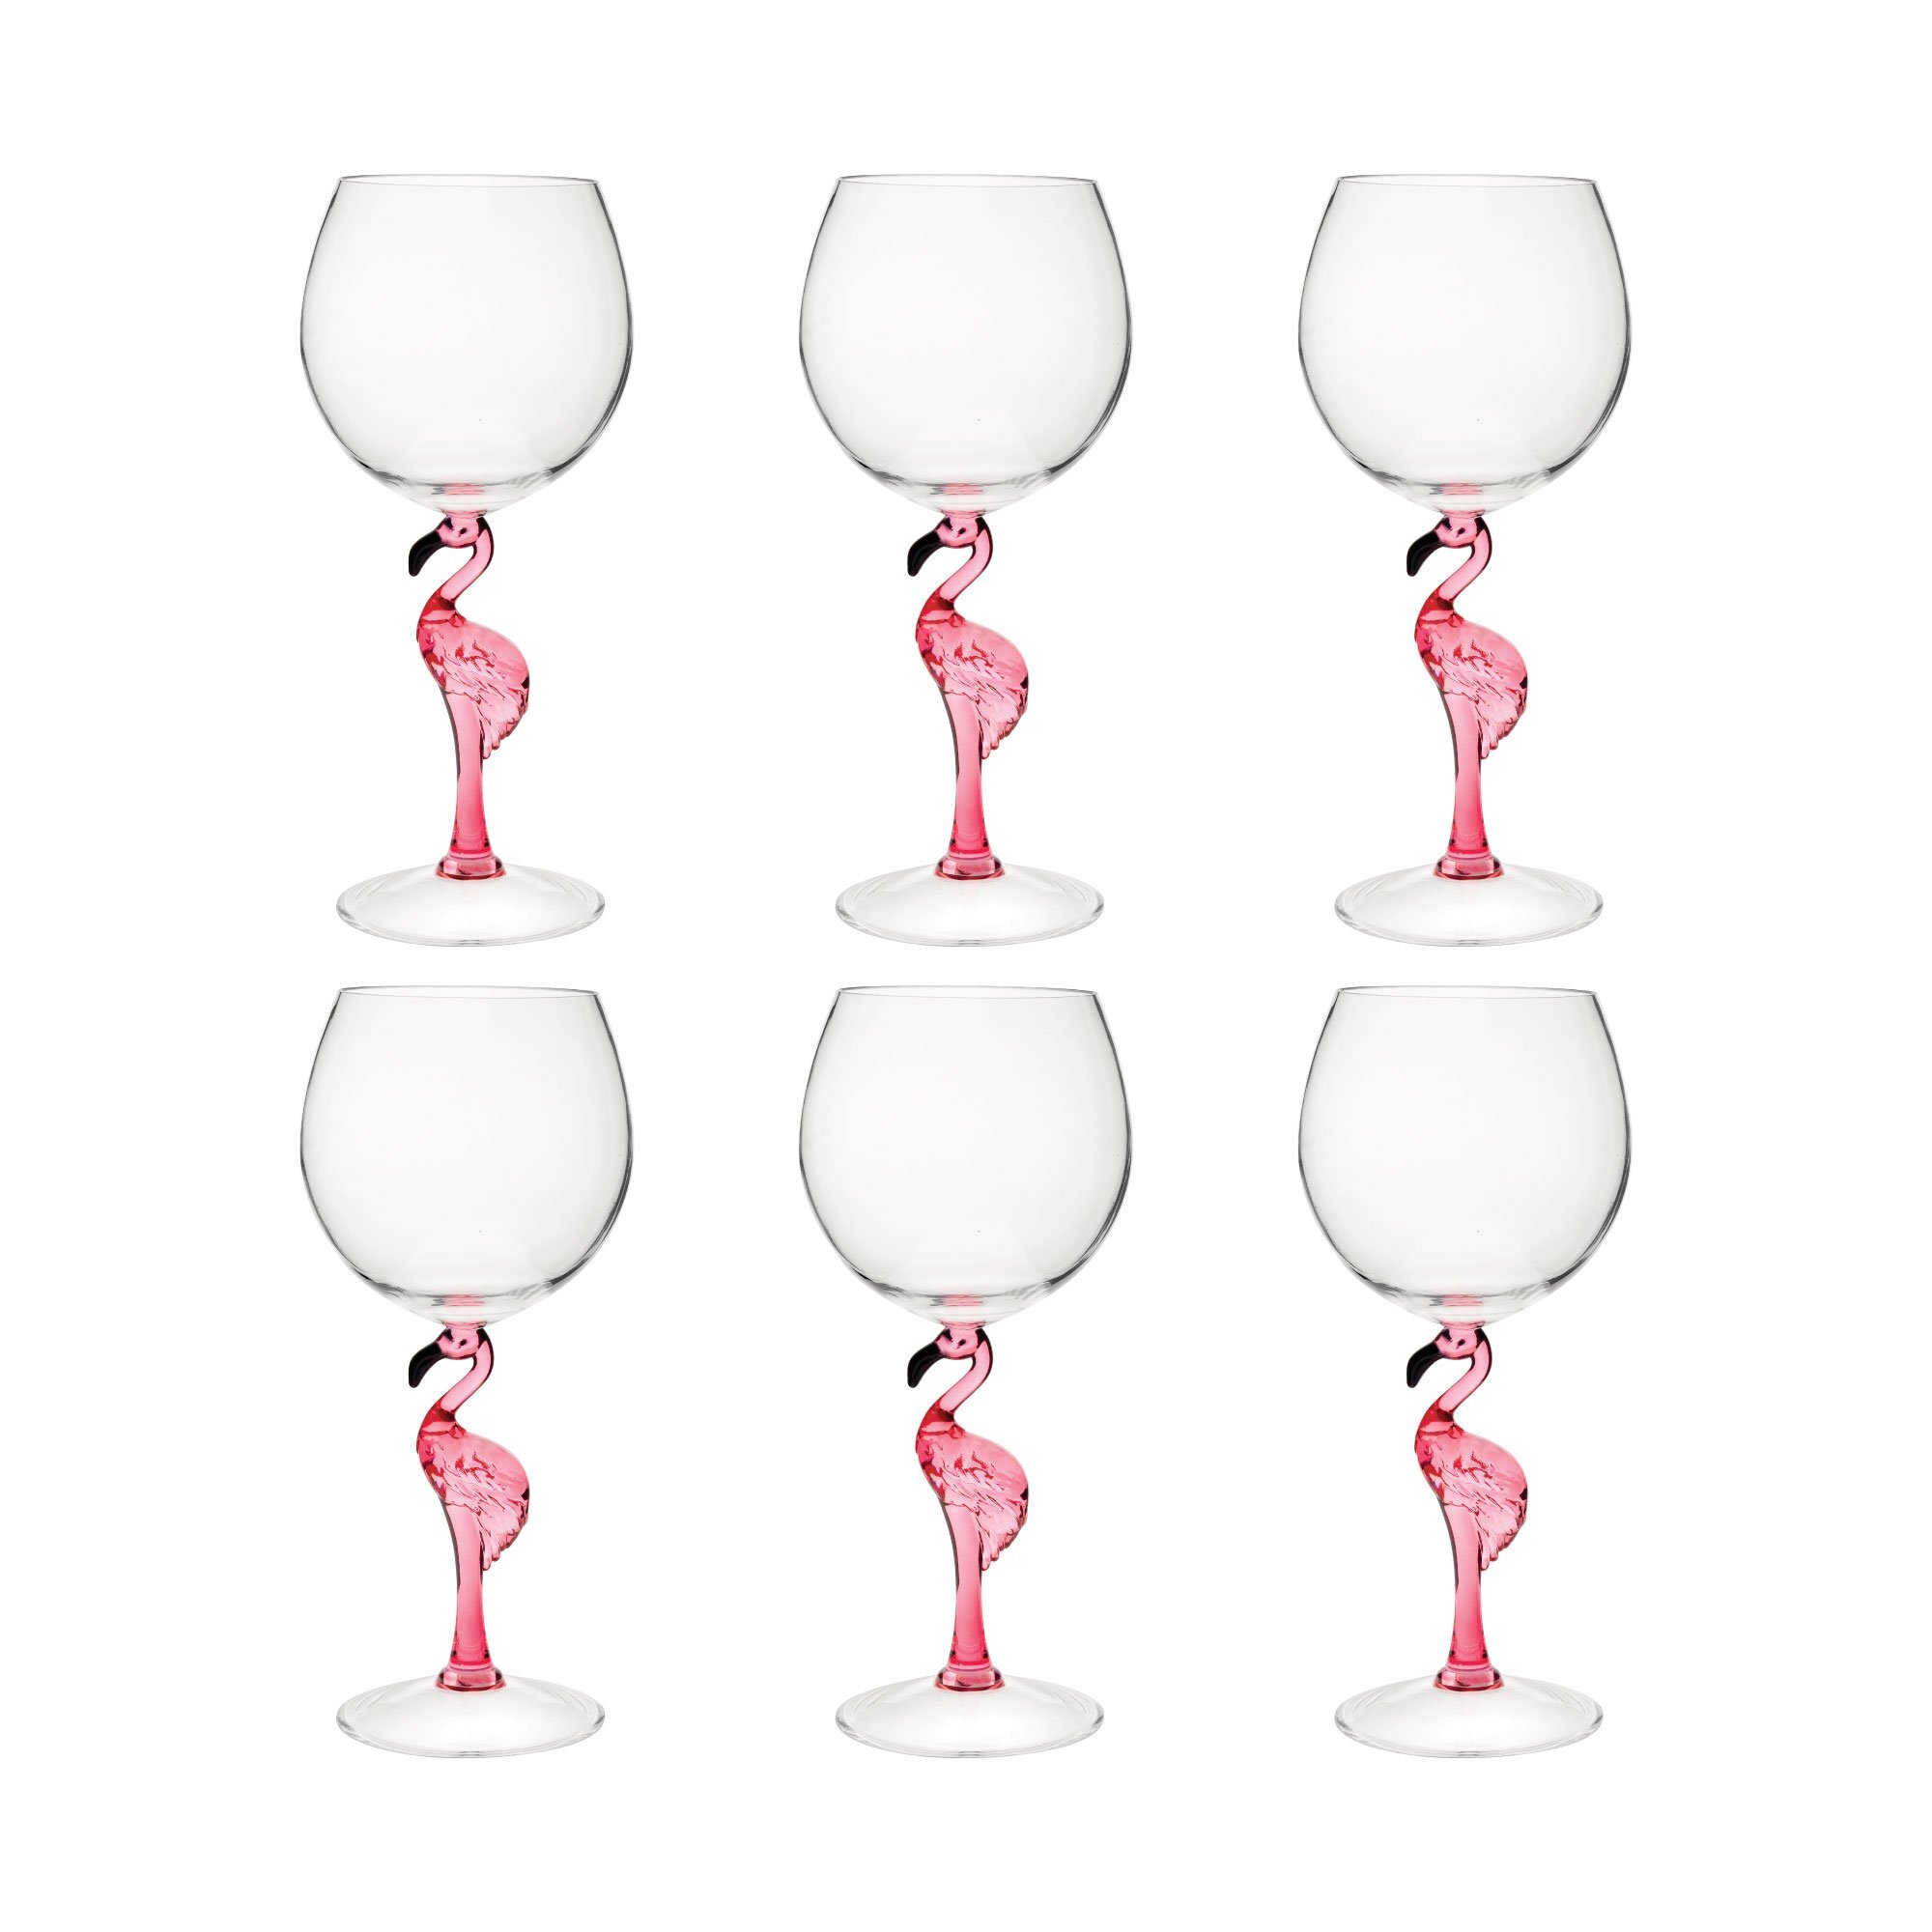 Acrylic Tumblers and Accessories – The Frazzled Flamingo